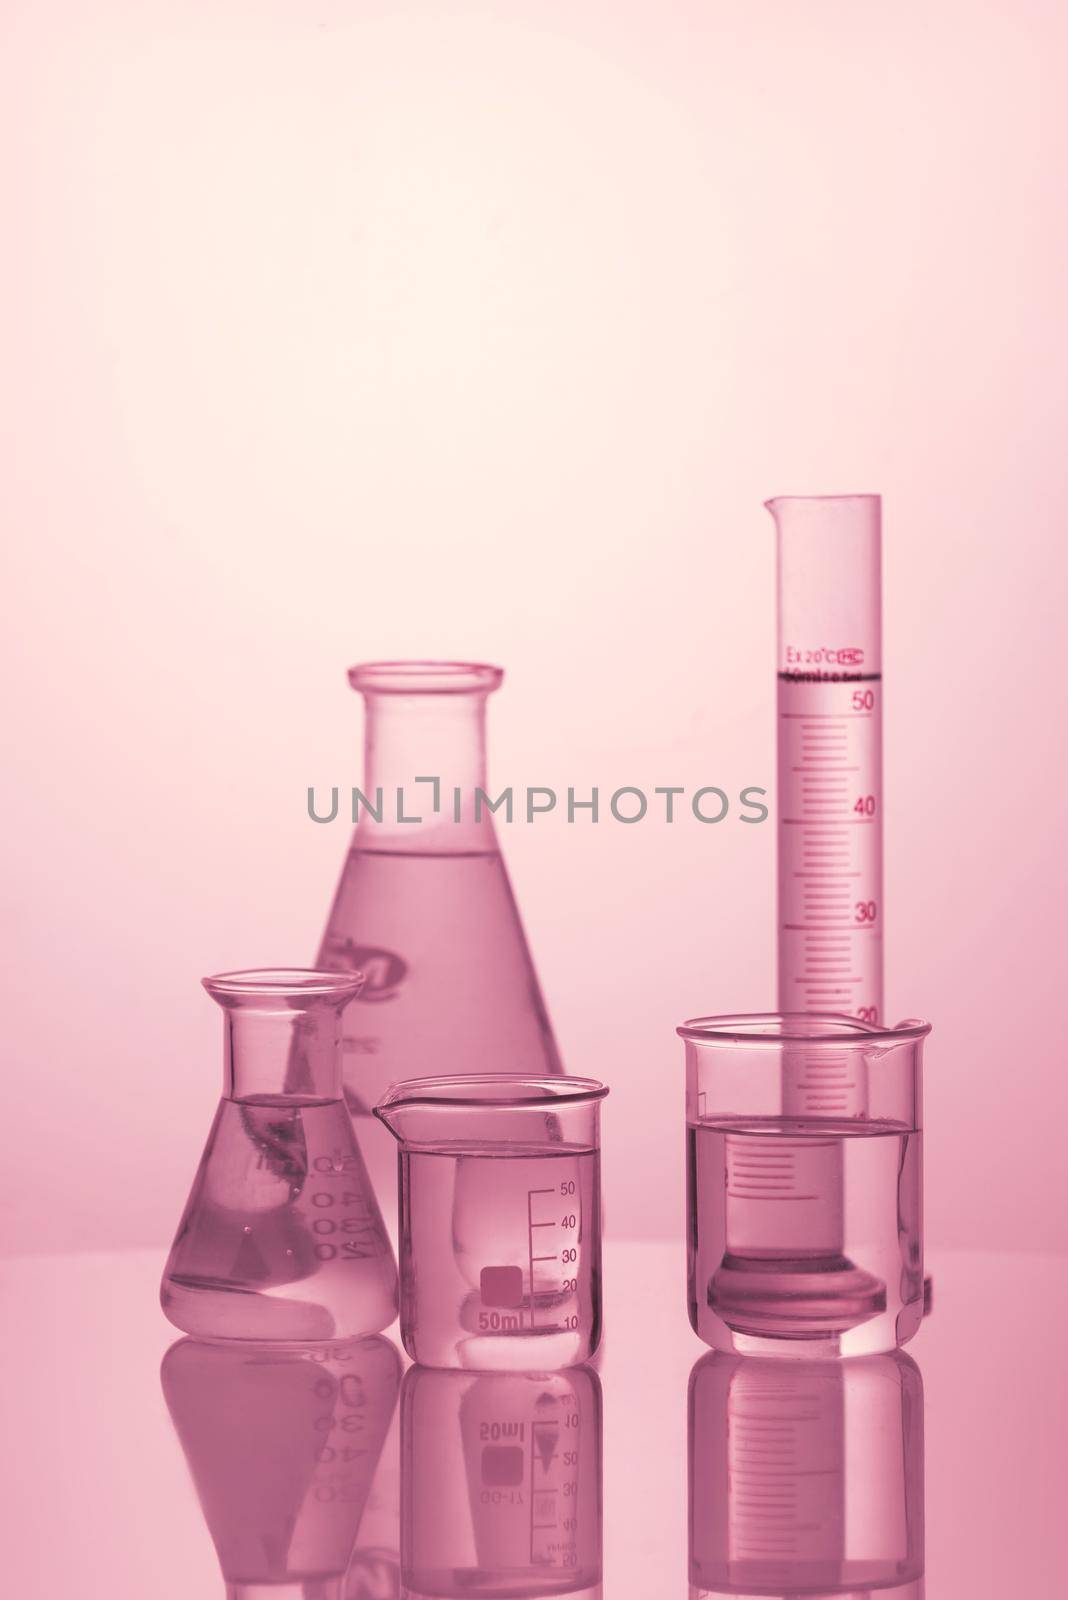 Lab theme. Science and medical background. Place for typohraphy 